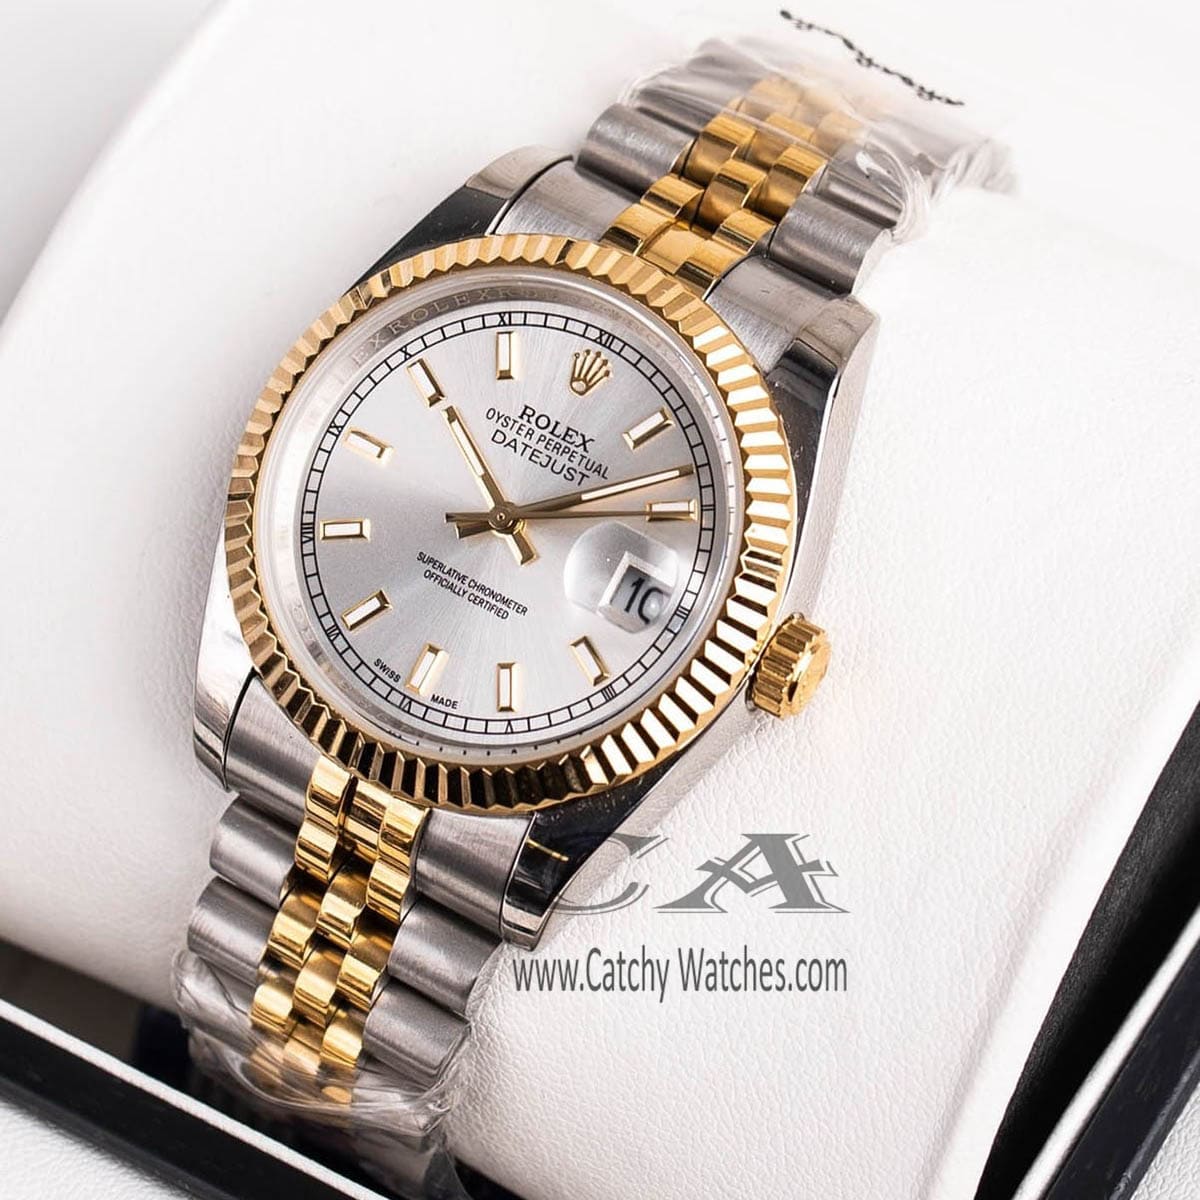 Rolex-Watch-For-Ladies-In-Egypt-With-Silver-Strap-Stainless-Steel-Belt-Silver-Dial-anlog